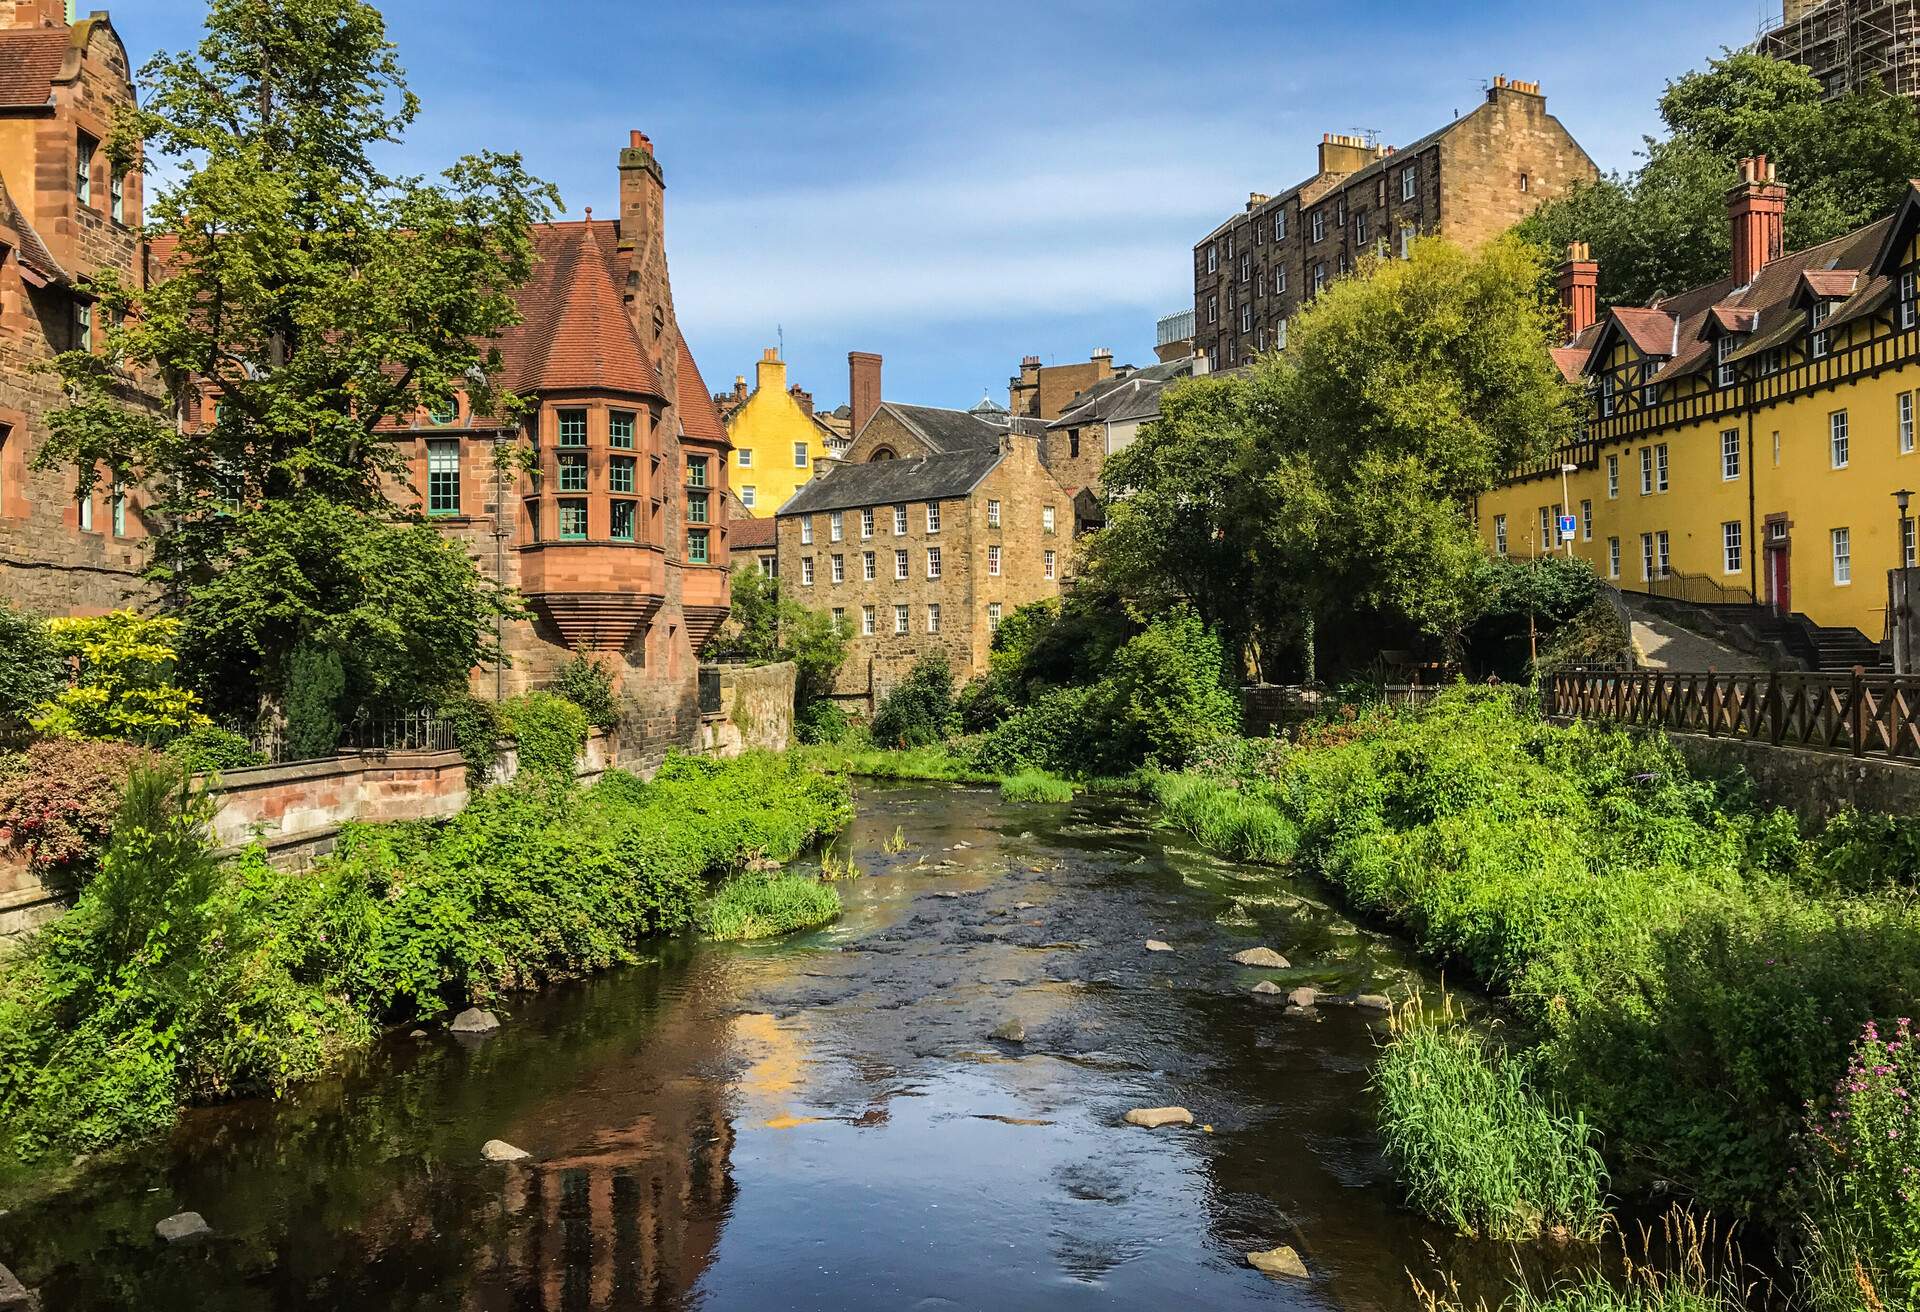 Tranquil Edinburgh summer scene of Water of Leith flowing through picturesque and historic Dean Village